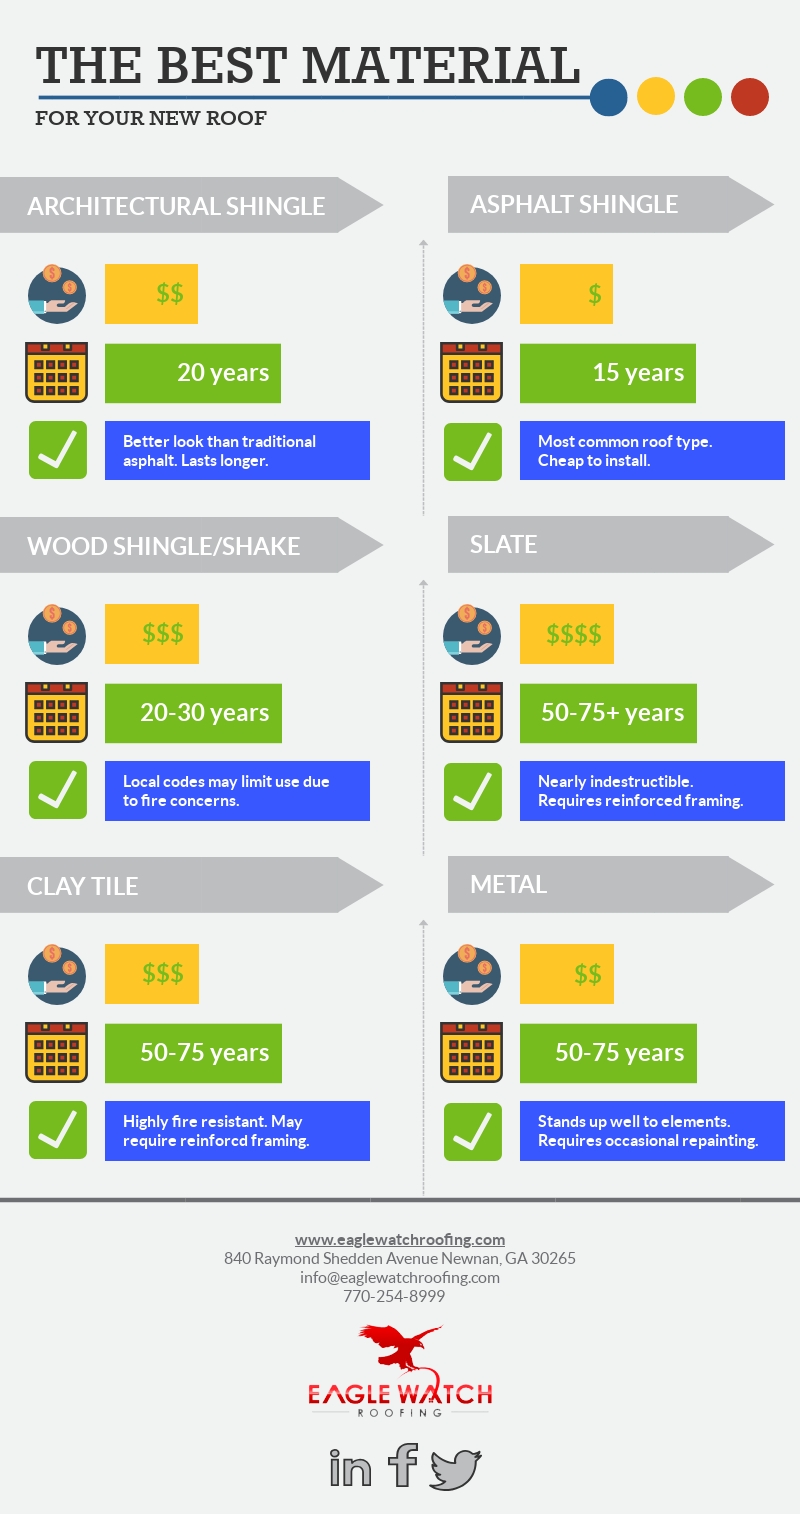 Choosing the Best Material for a New Roof [infographic]